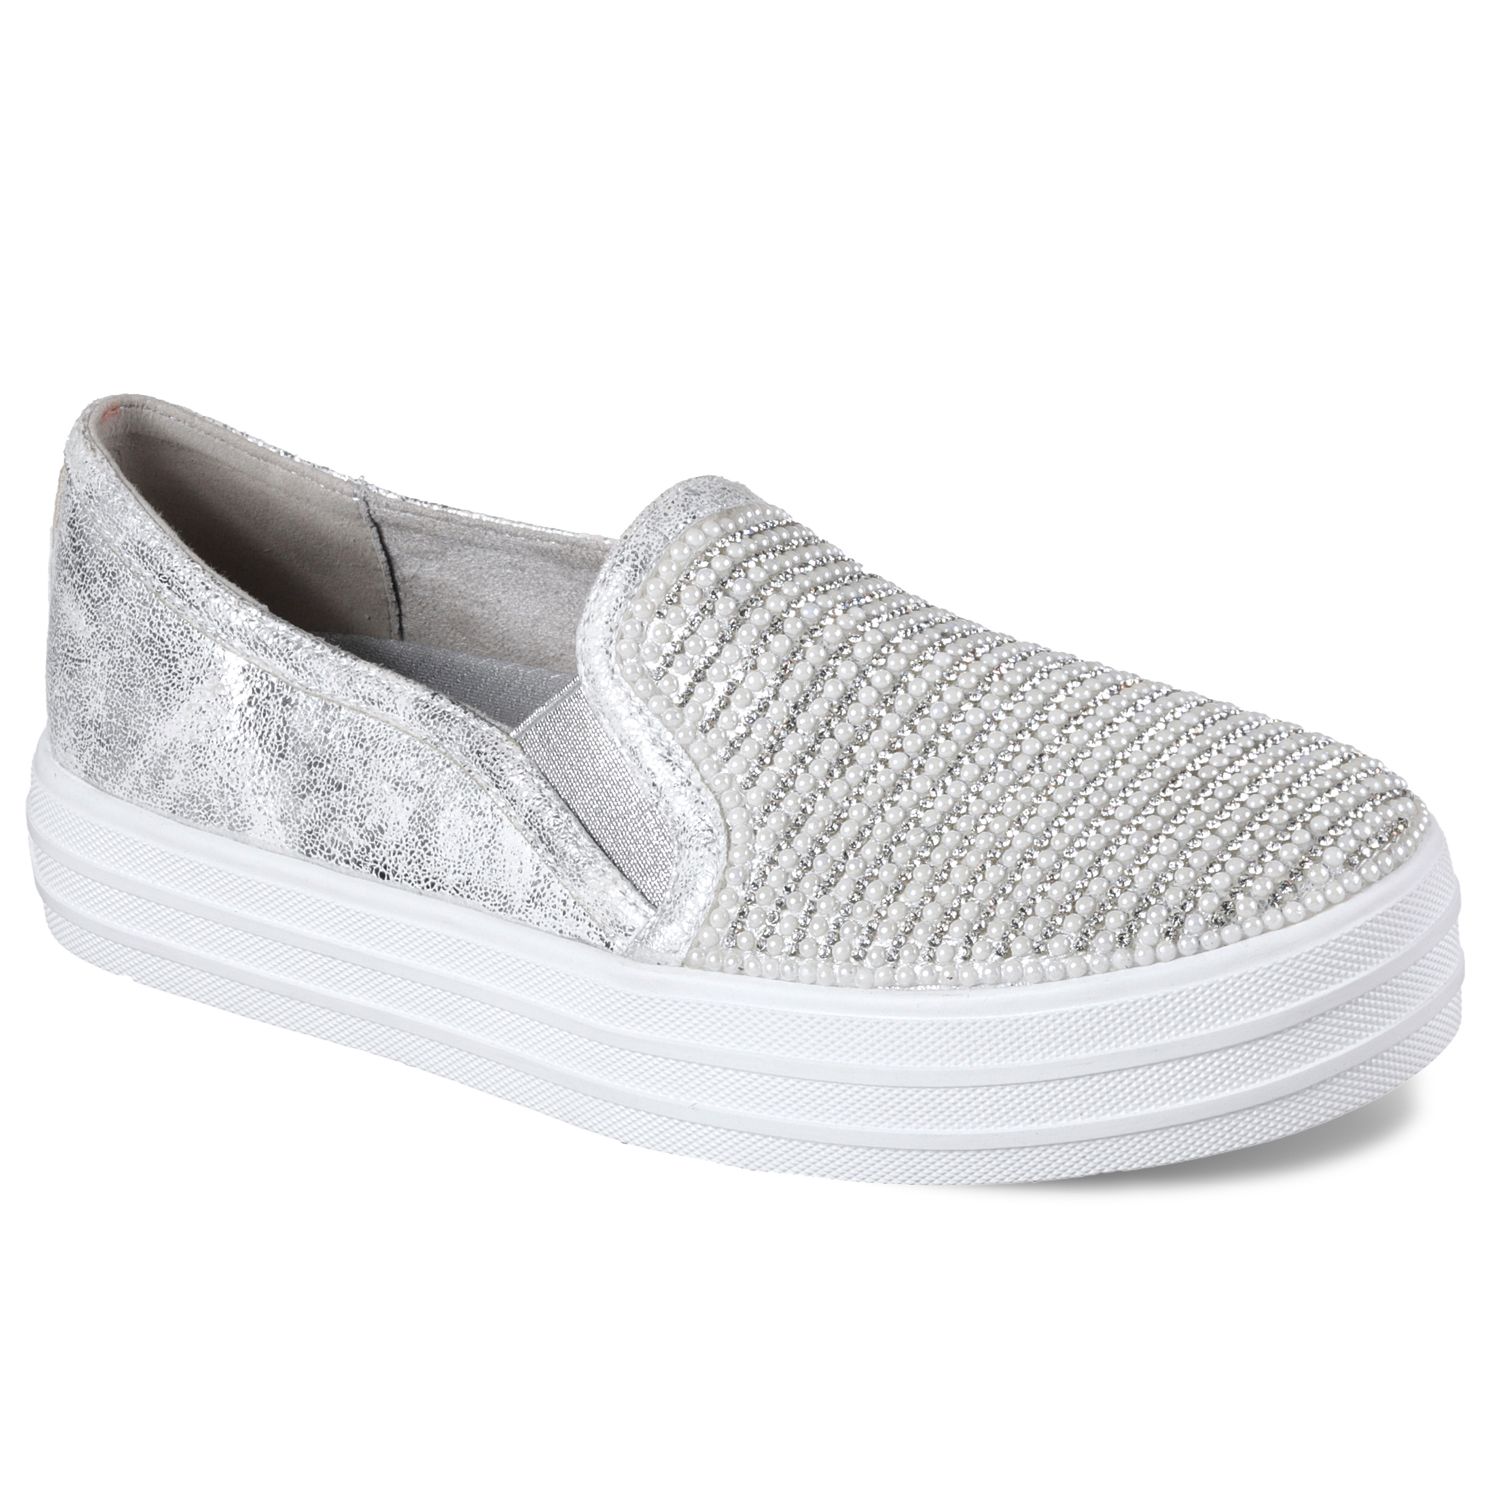 Mirilla perspectiva gancho Skechers Double Up Flash Sales, SAVE 55%.